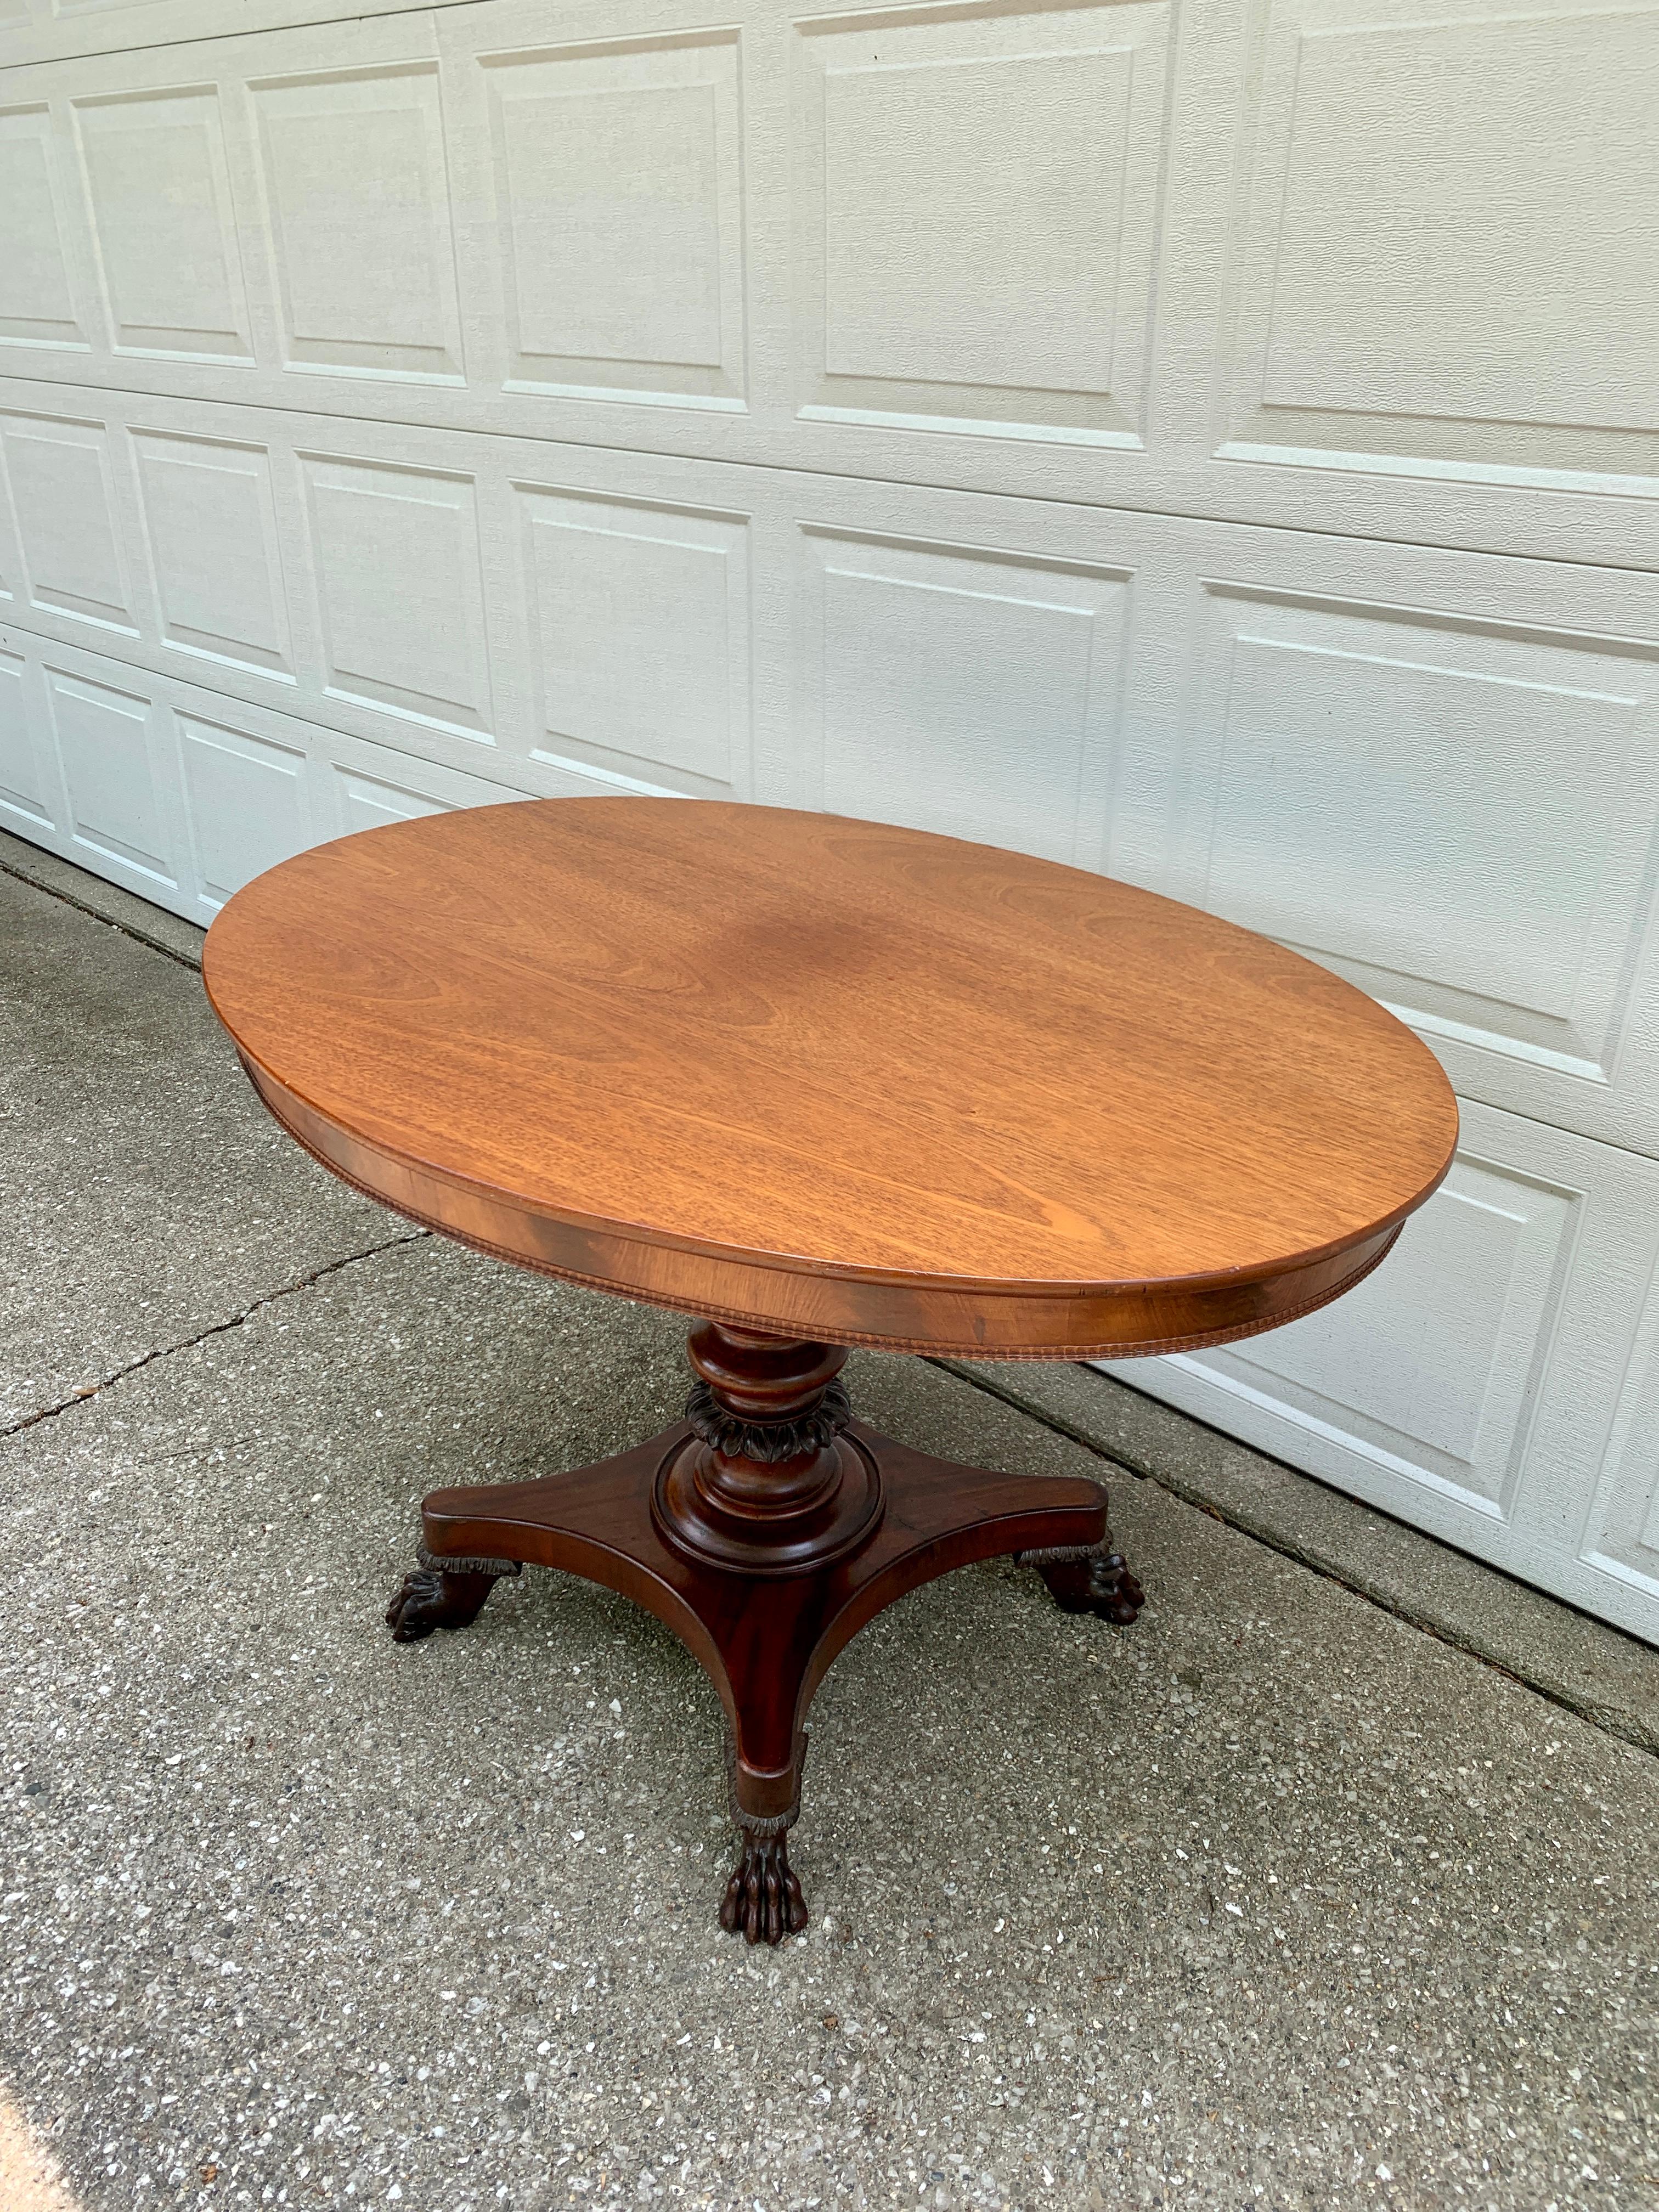 Antique American Empire Mahogany Paw Foot Pedestal Center Table In Good Condition For Sale In Elkhart, IN